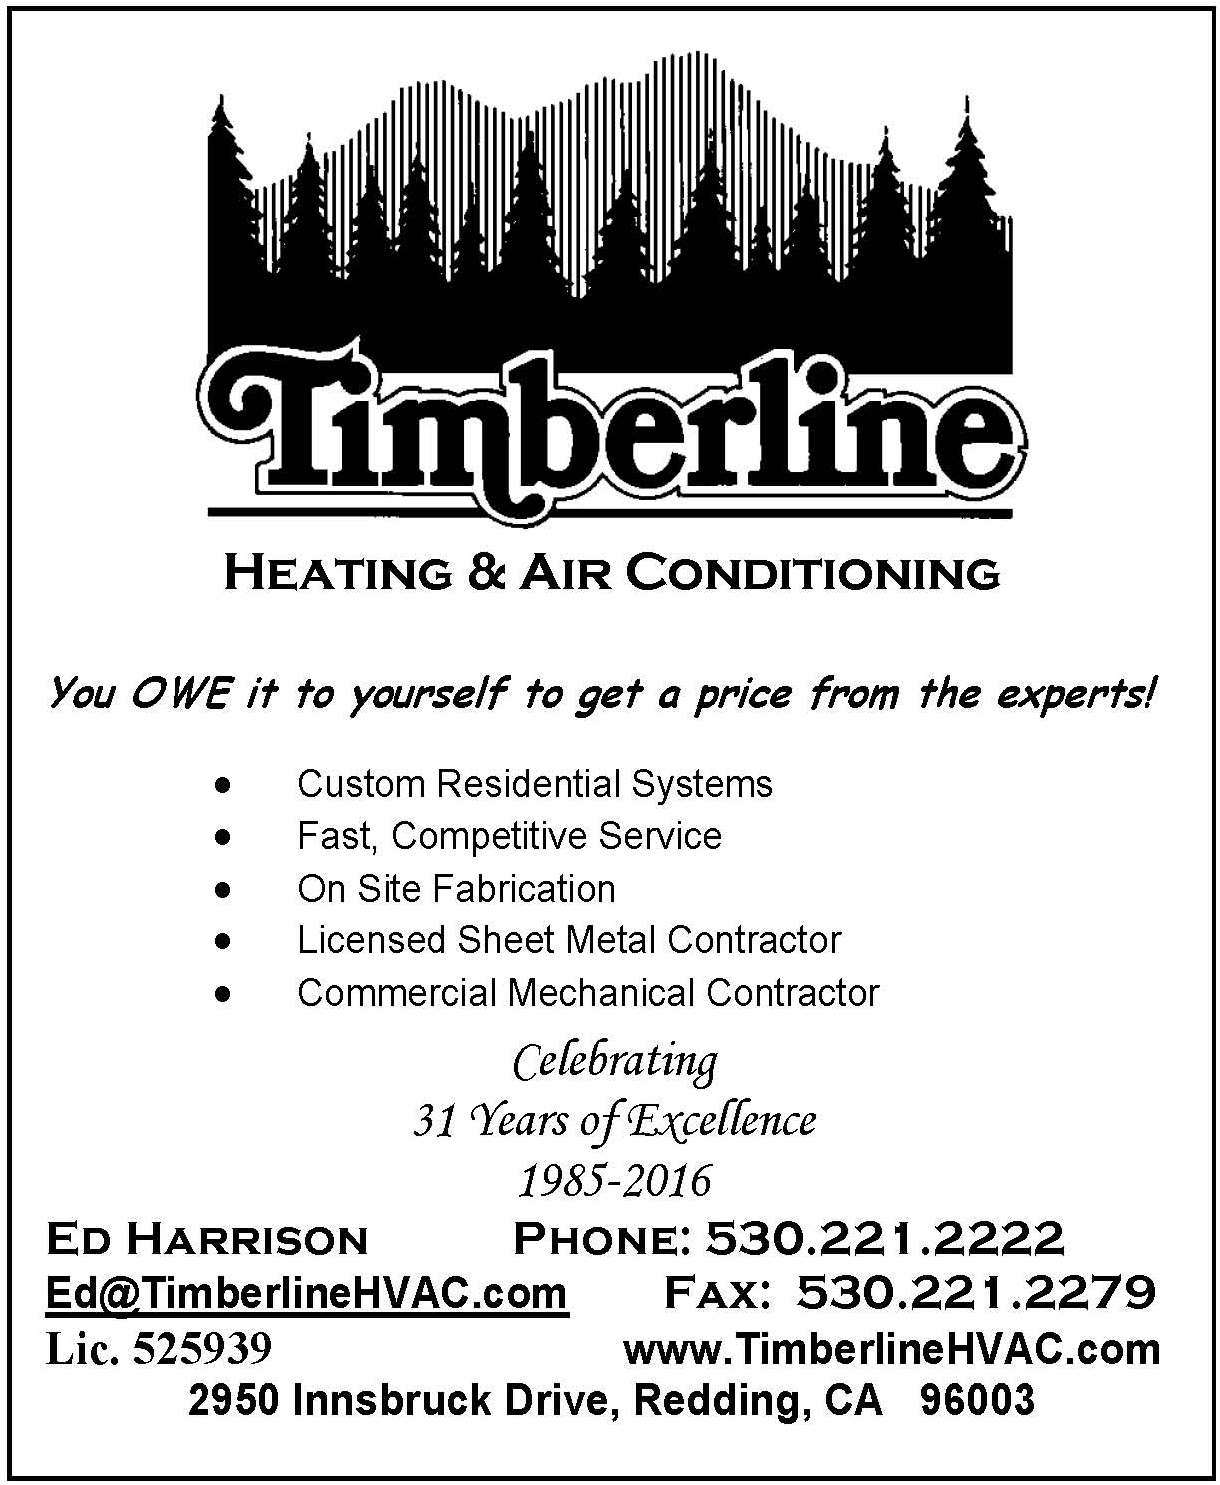 Timberline Heating & Air Conditioning